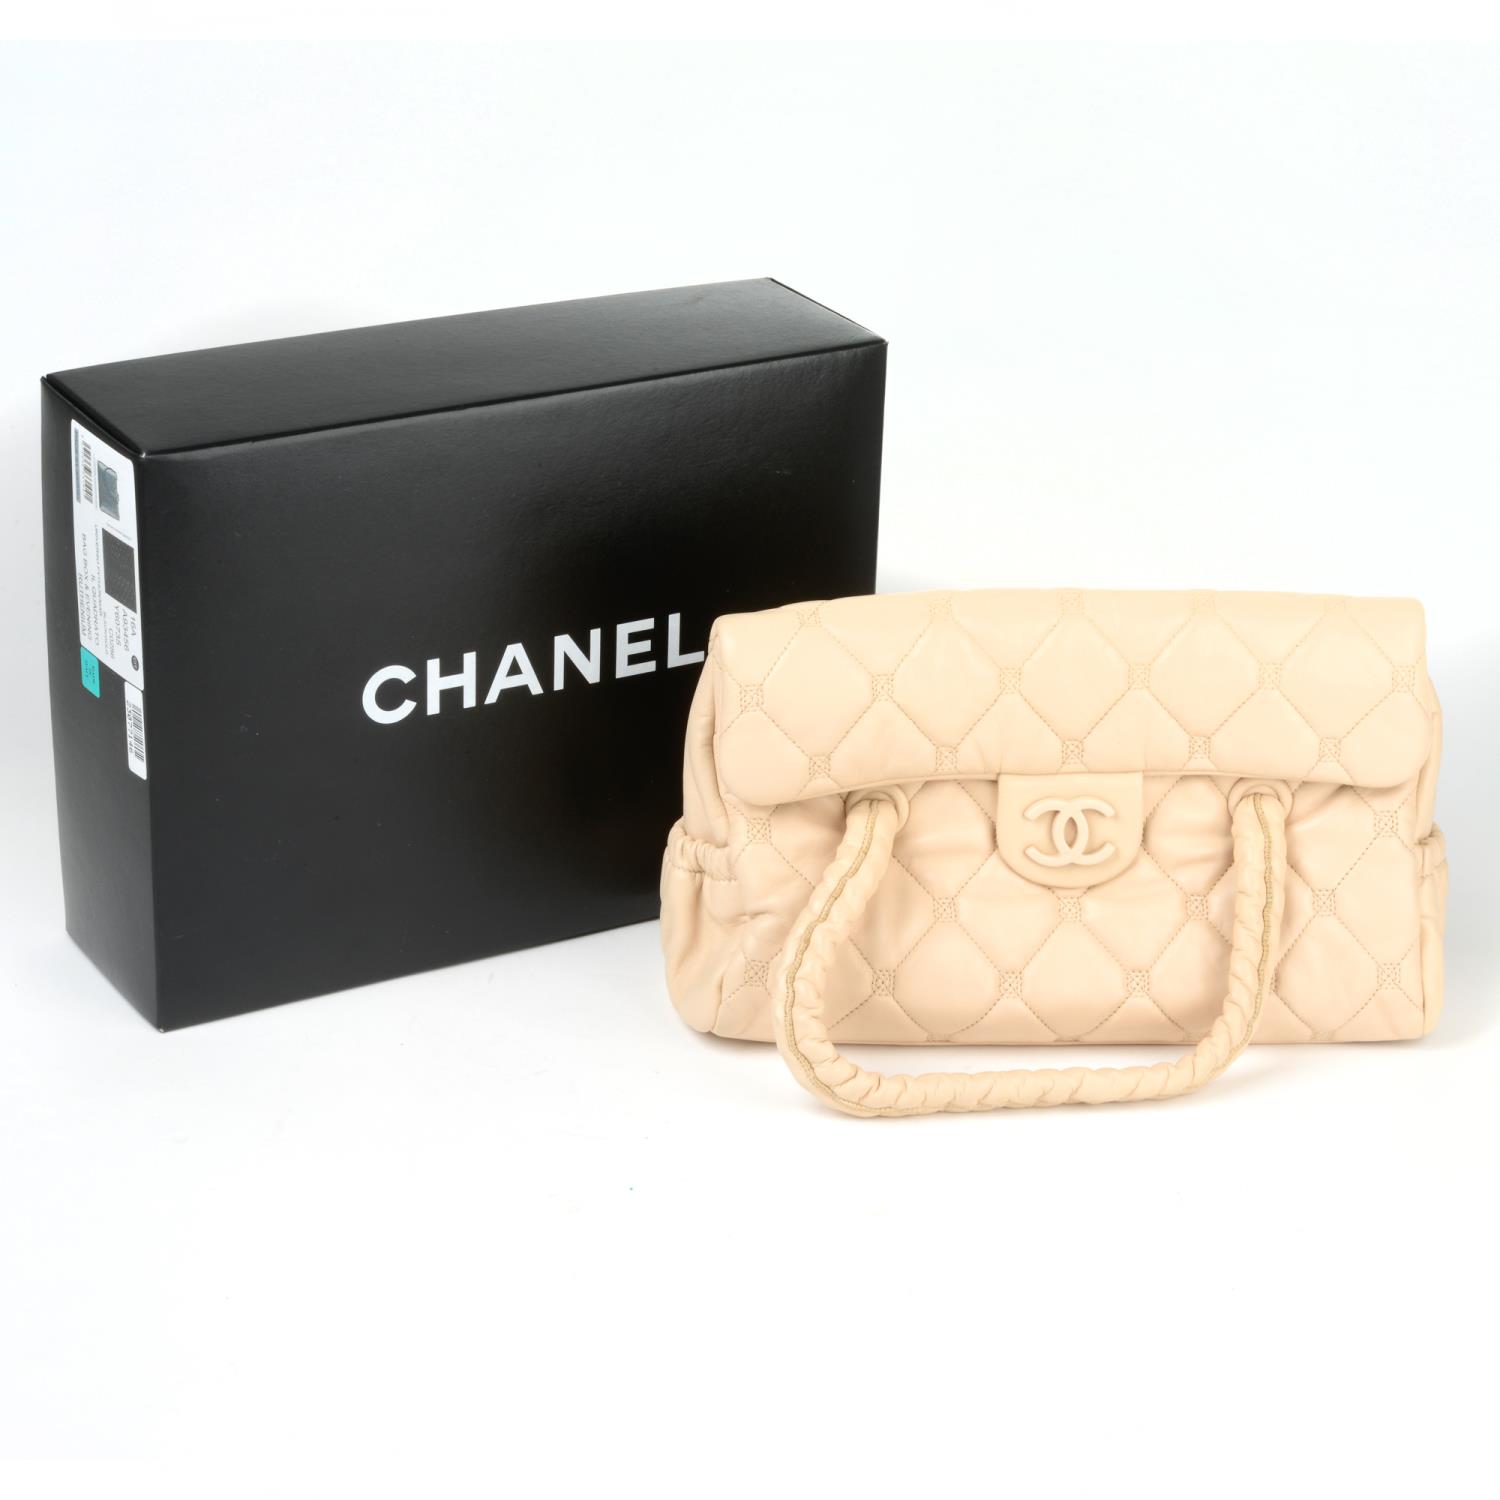 CHANEL - a pale quilted leather Hidden Chain handbag. - Image 5 of 5